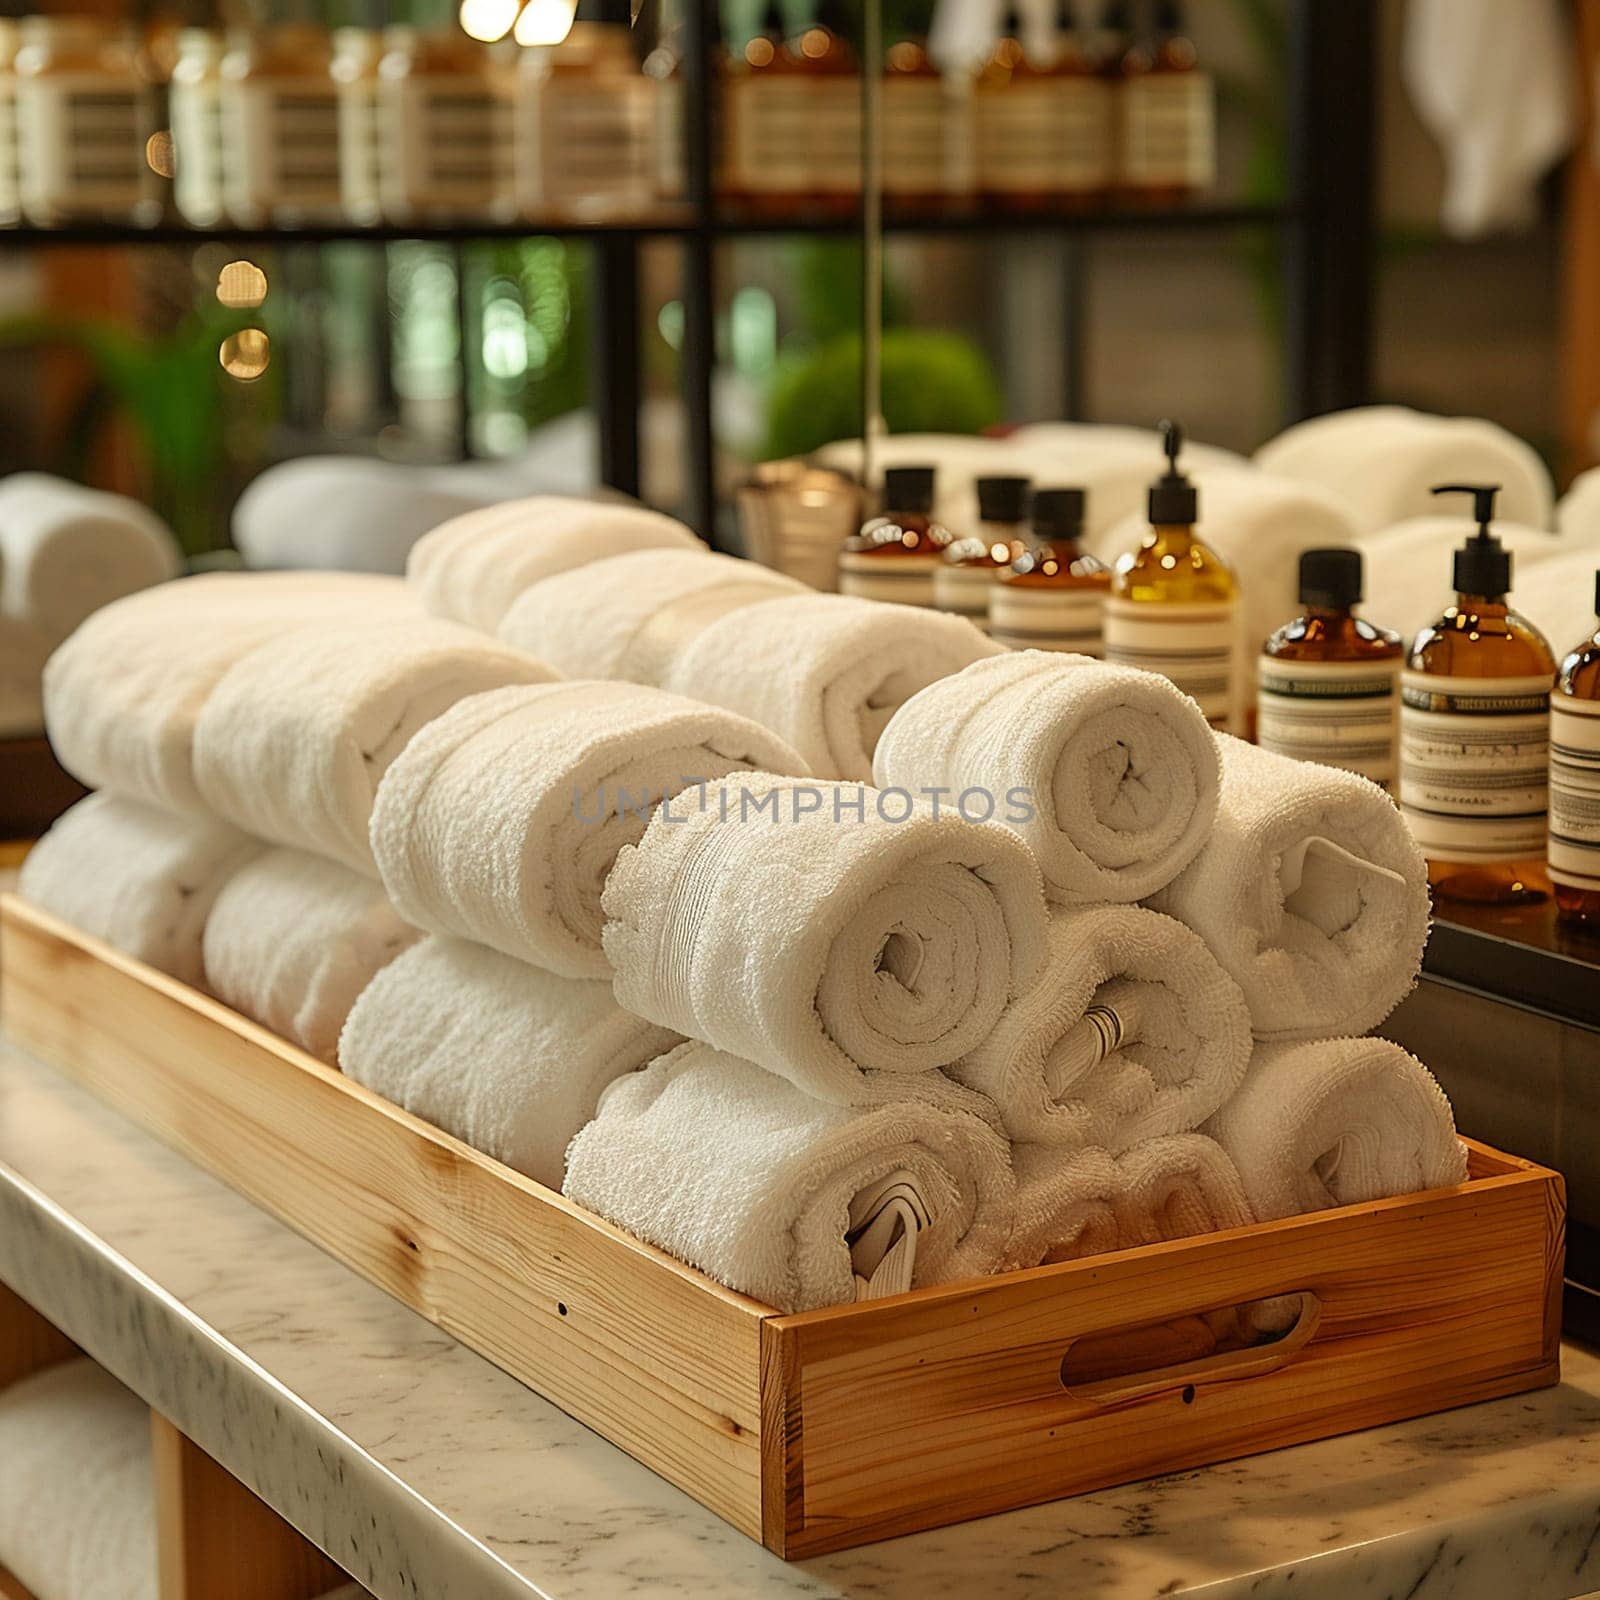 Neatly arranged set of rolled towels in spa, denoting luxury and relaxation.